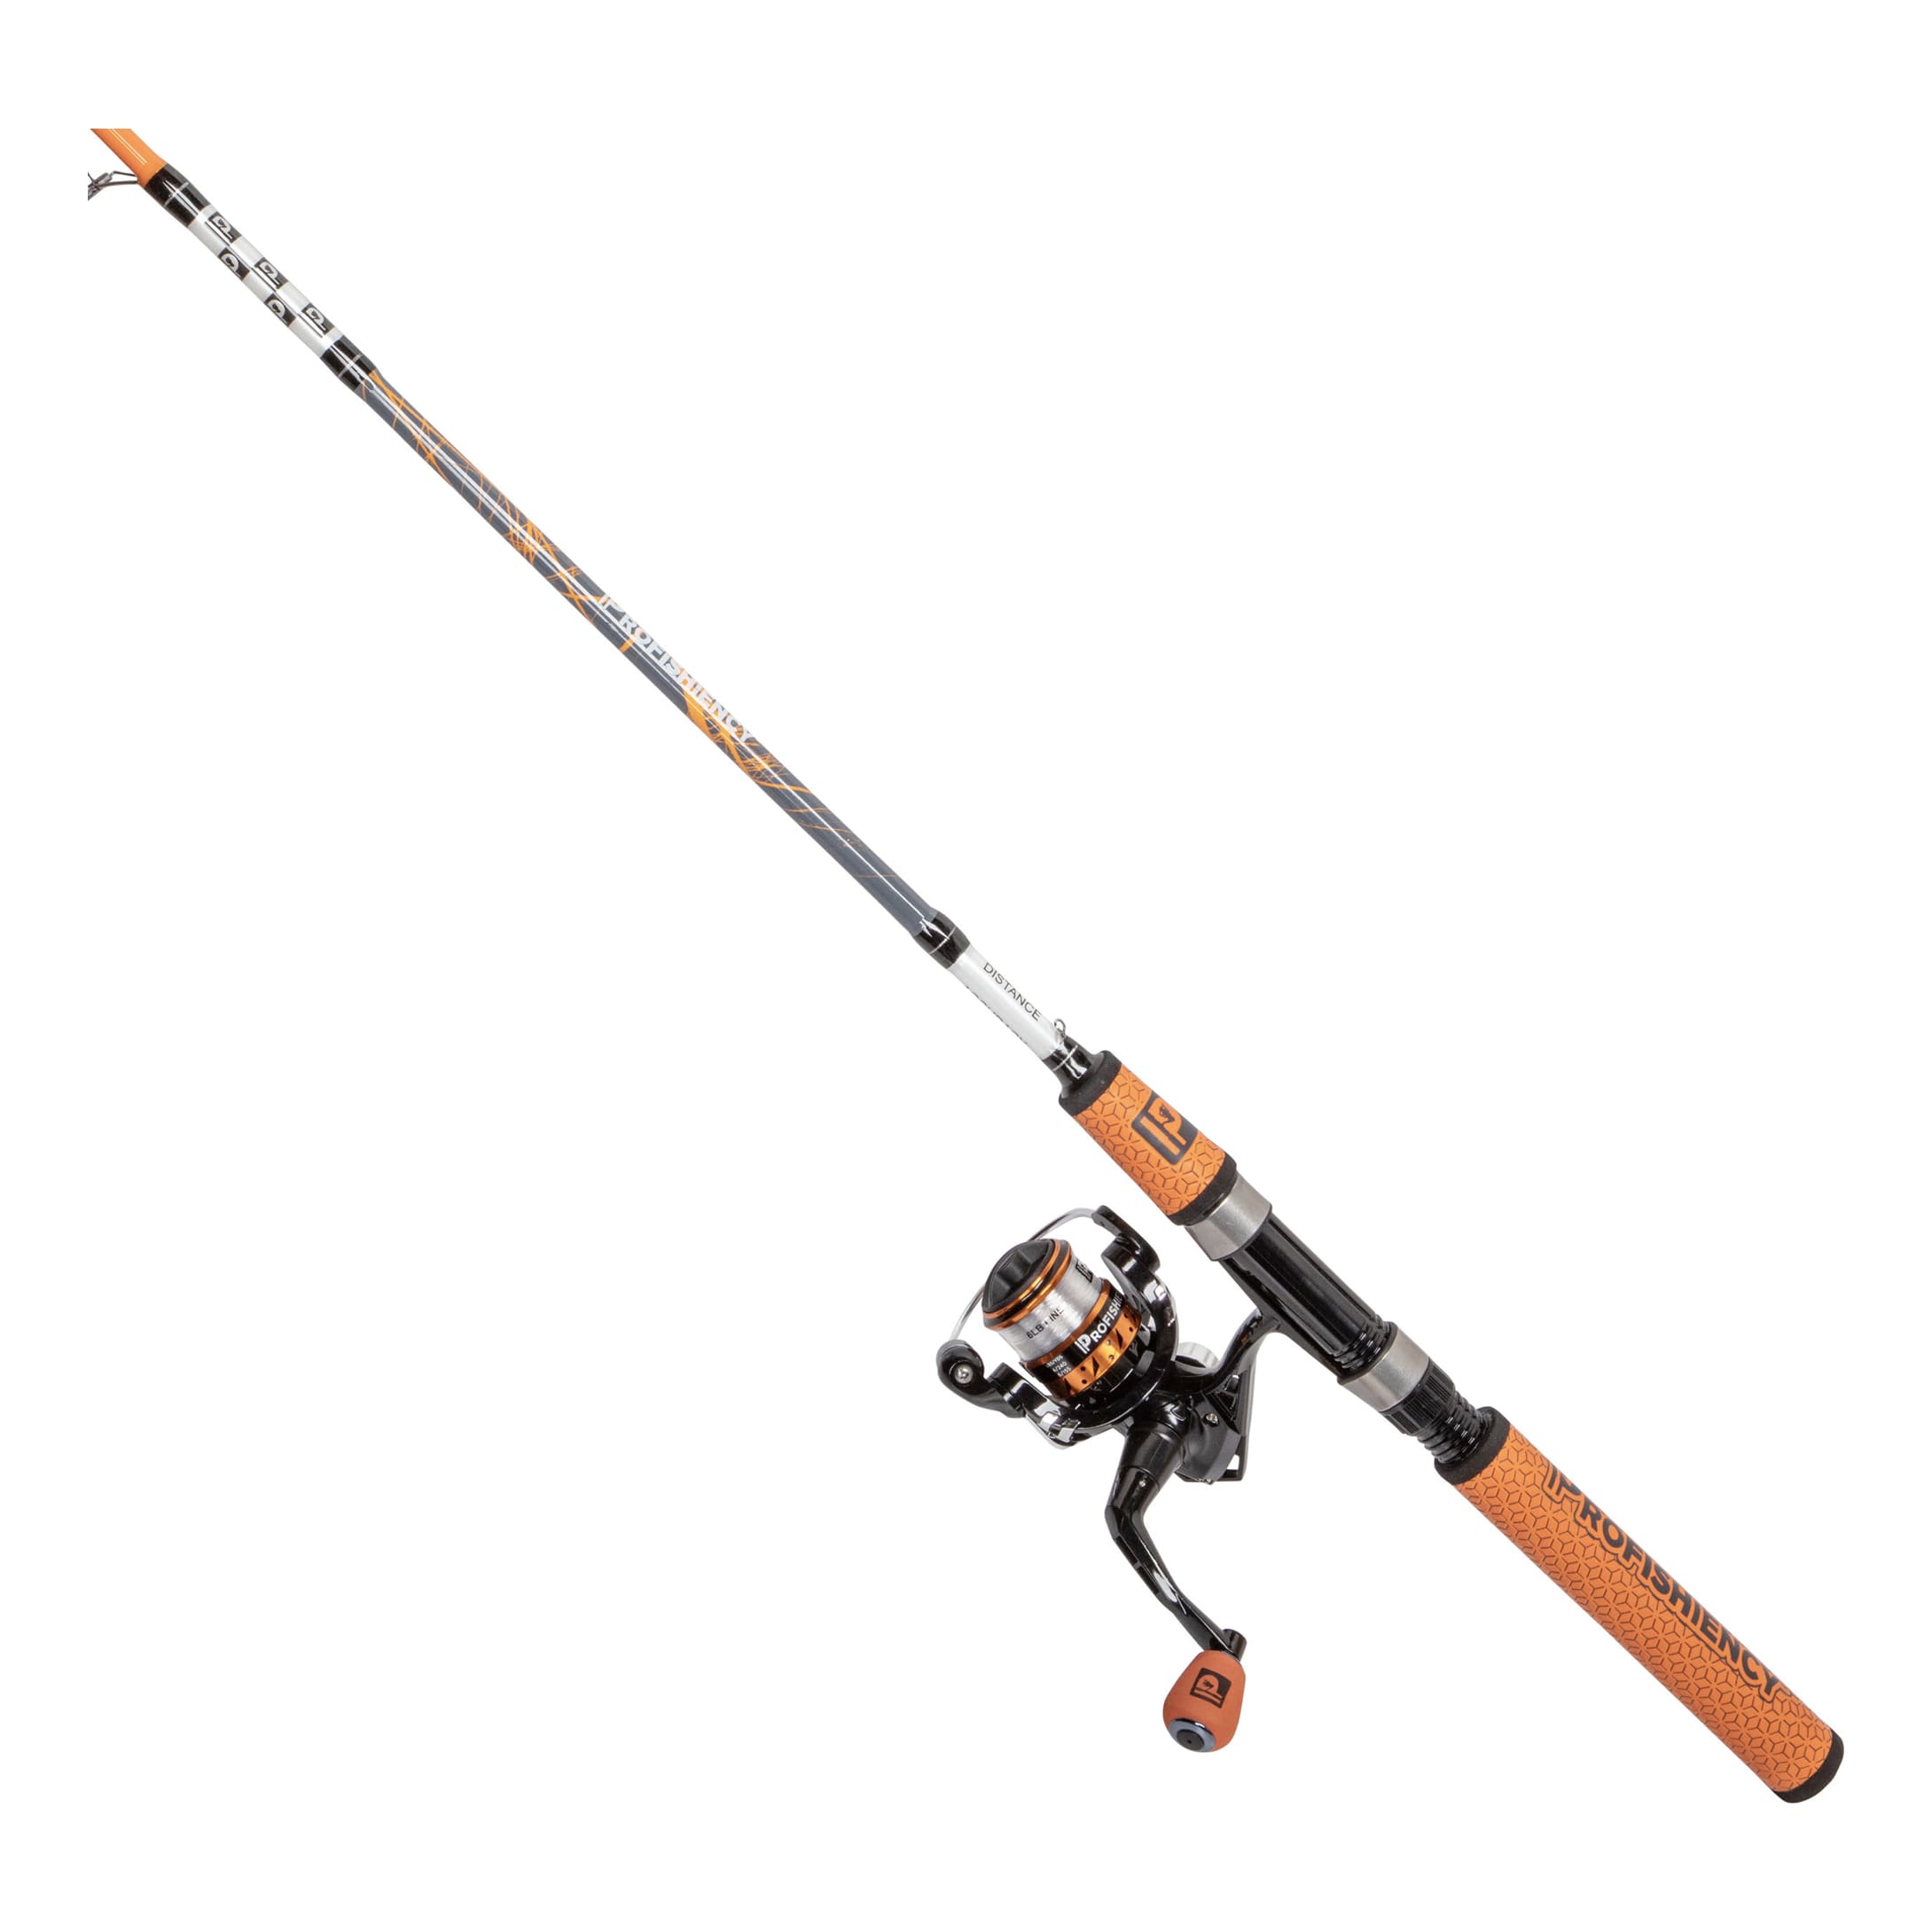 Berkley Cherrywood HD Ice Spinning Fishing Rod and Reel Combo - 24 in